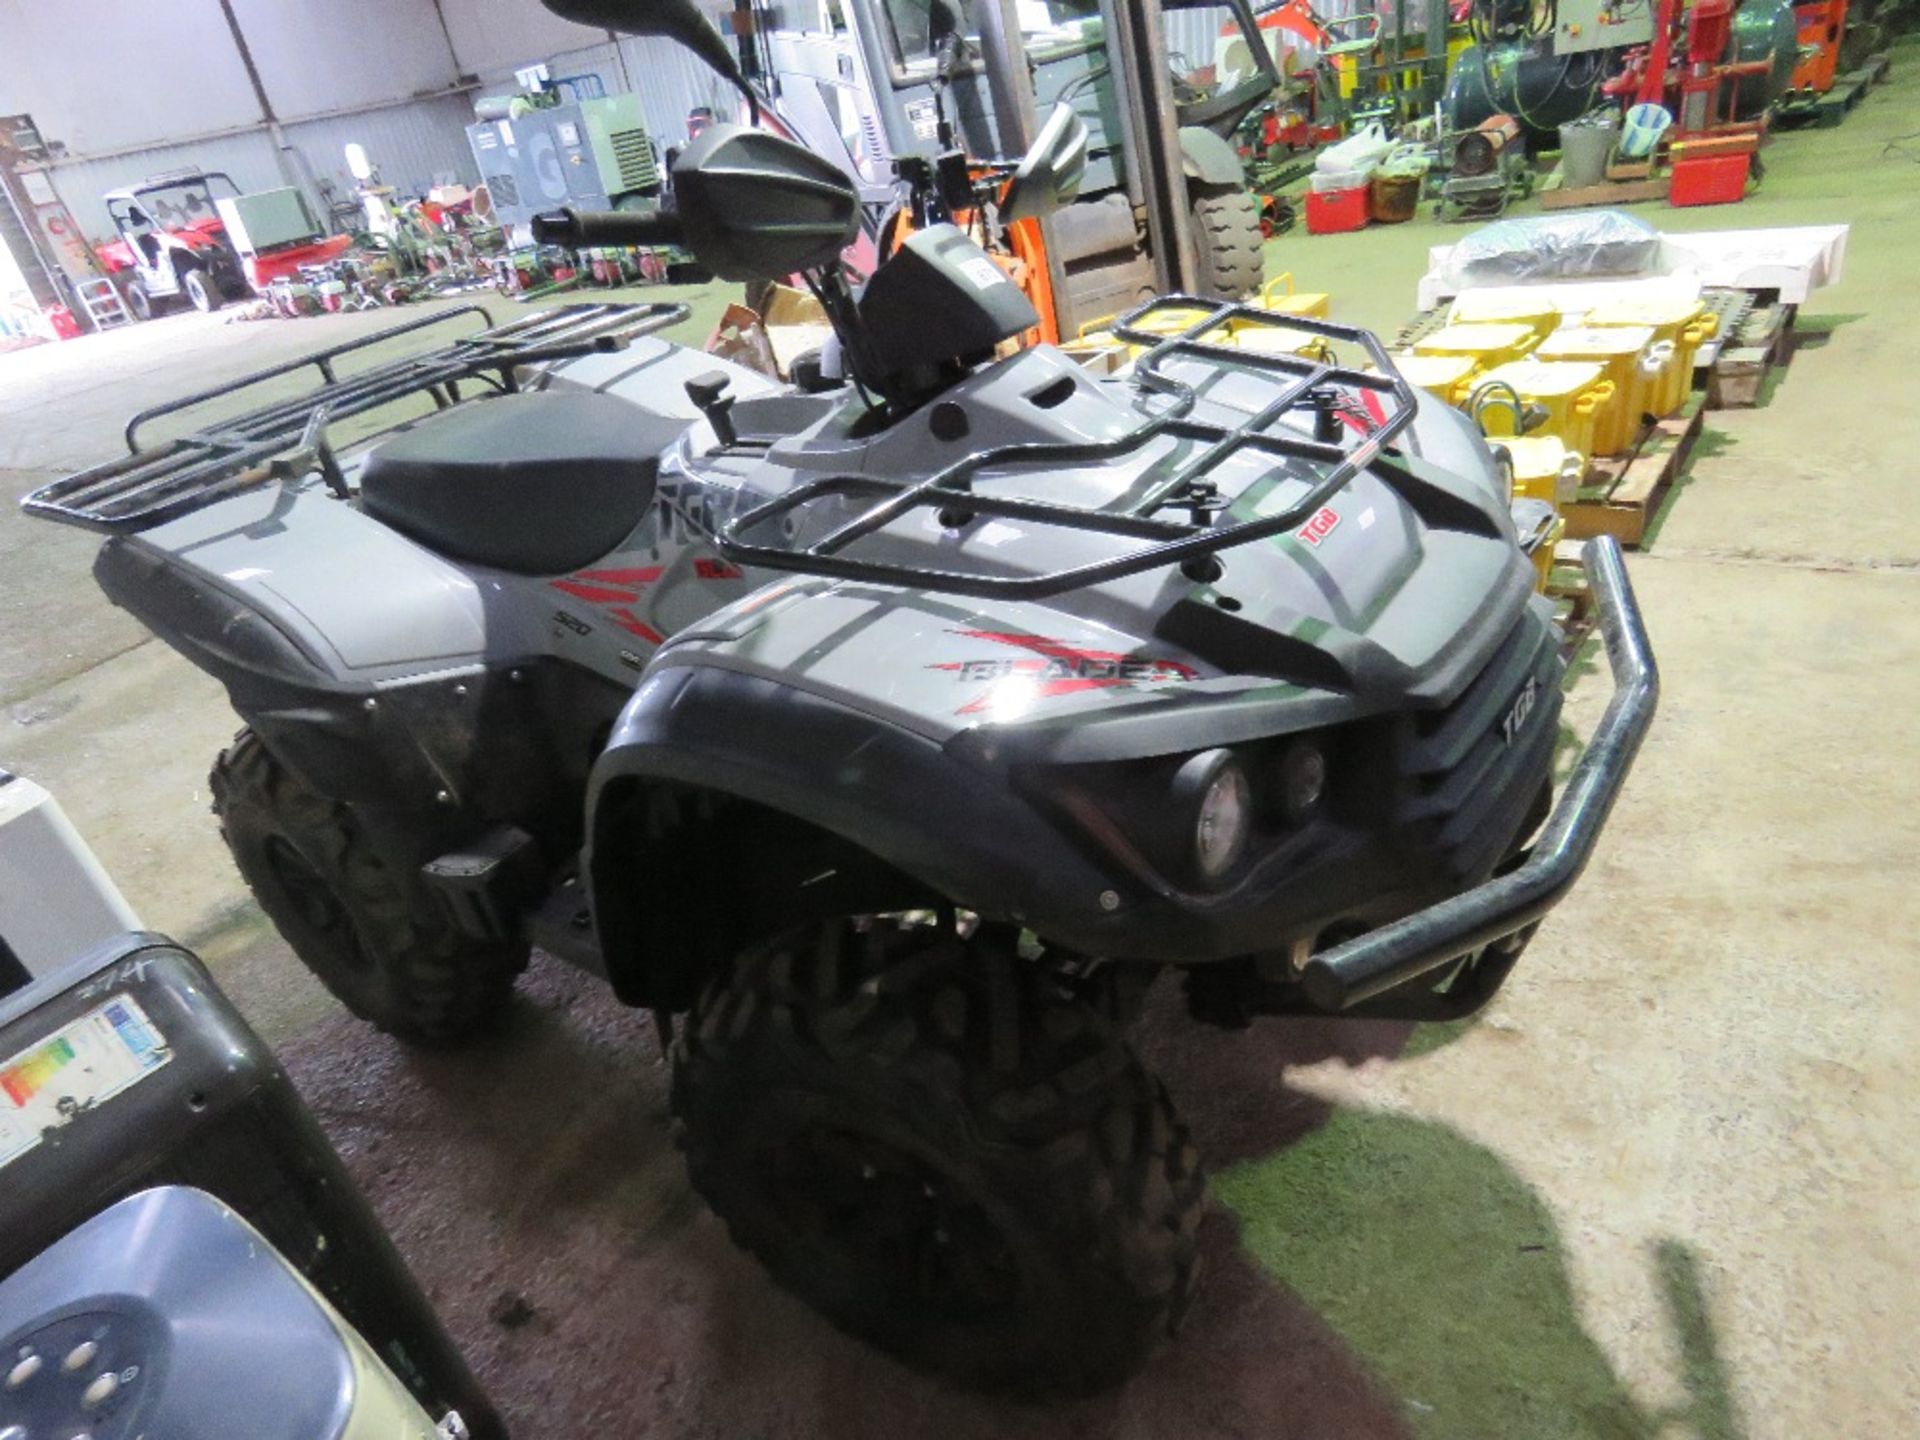 TGB BLADE 520SL EPS 4WD QUAD BIKE, 164 REC MILES FROM NEW. REG:LG72 MYO. WHEN TESTED WAS SEEN TO STA - Image 2 of 7